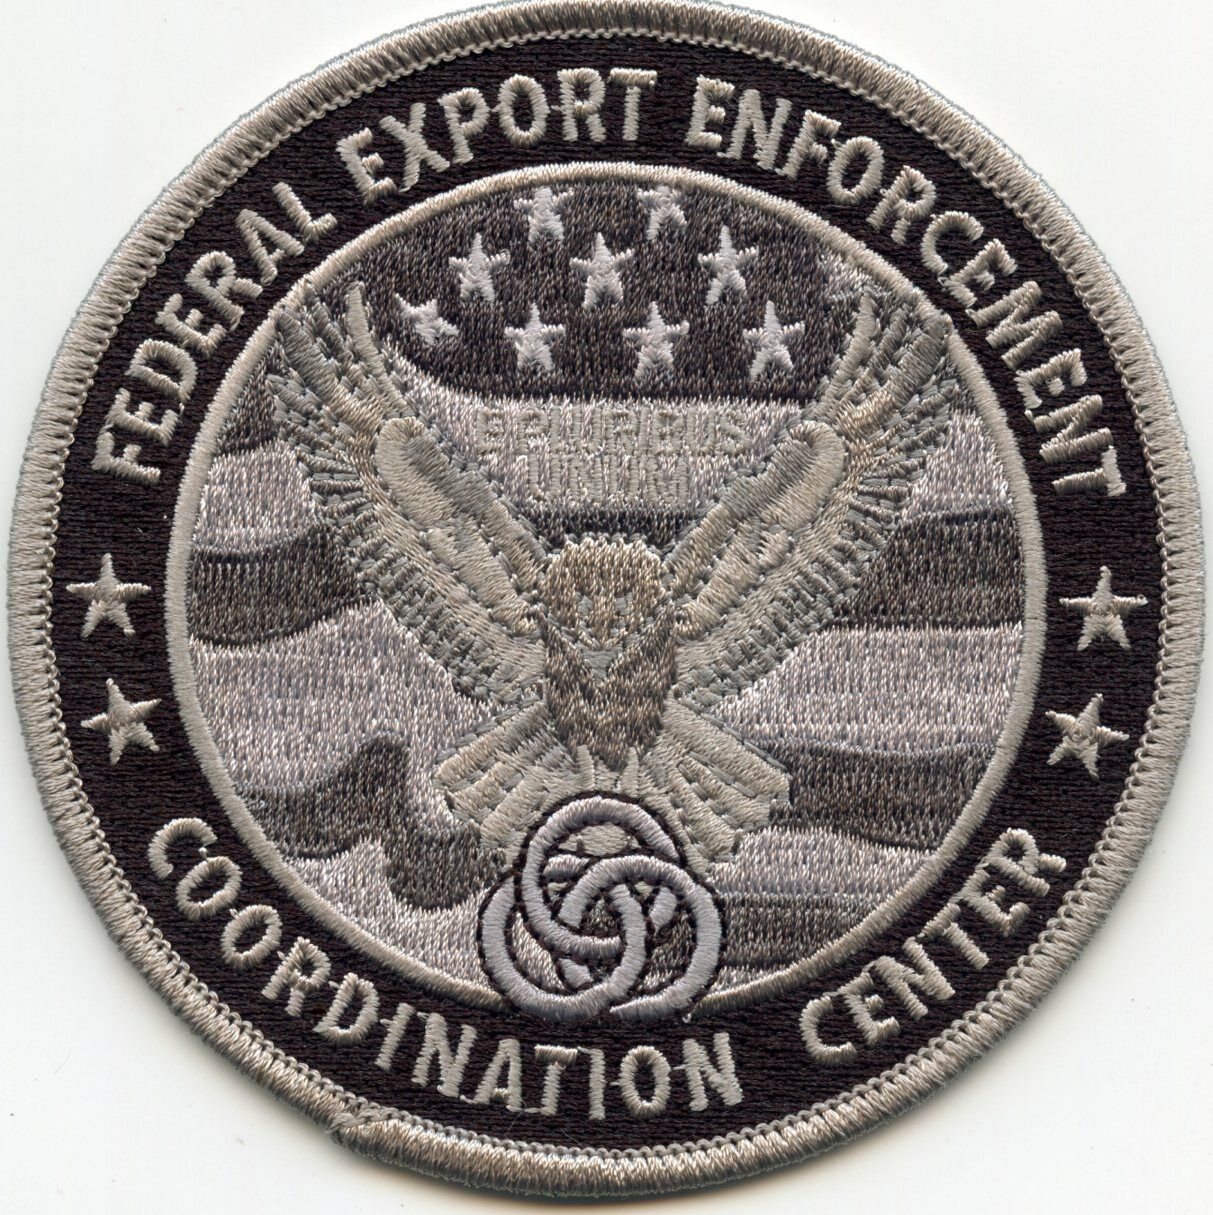 FEDERAL EXPORT ENFORCEMENT Washington DC subdued gray POLICE PATCH